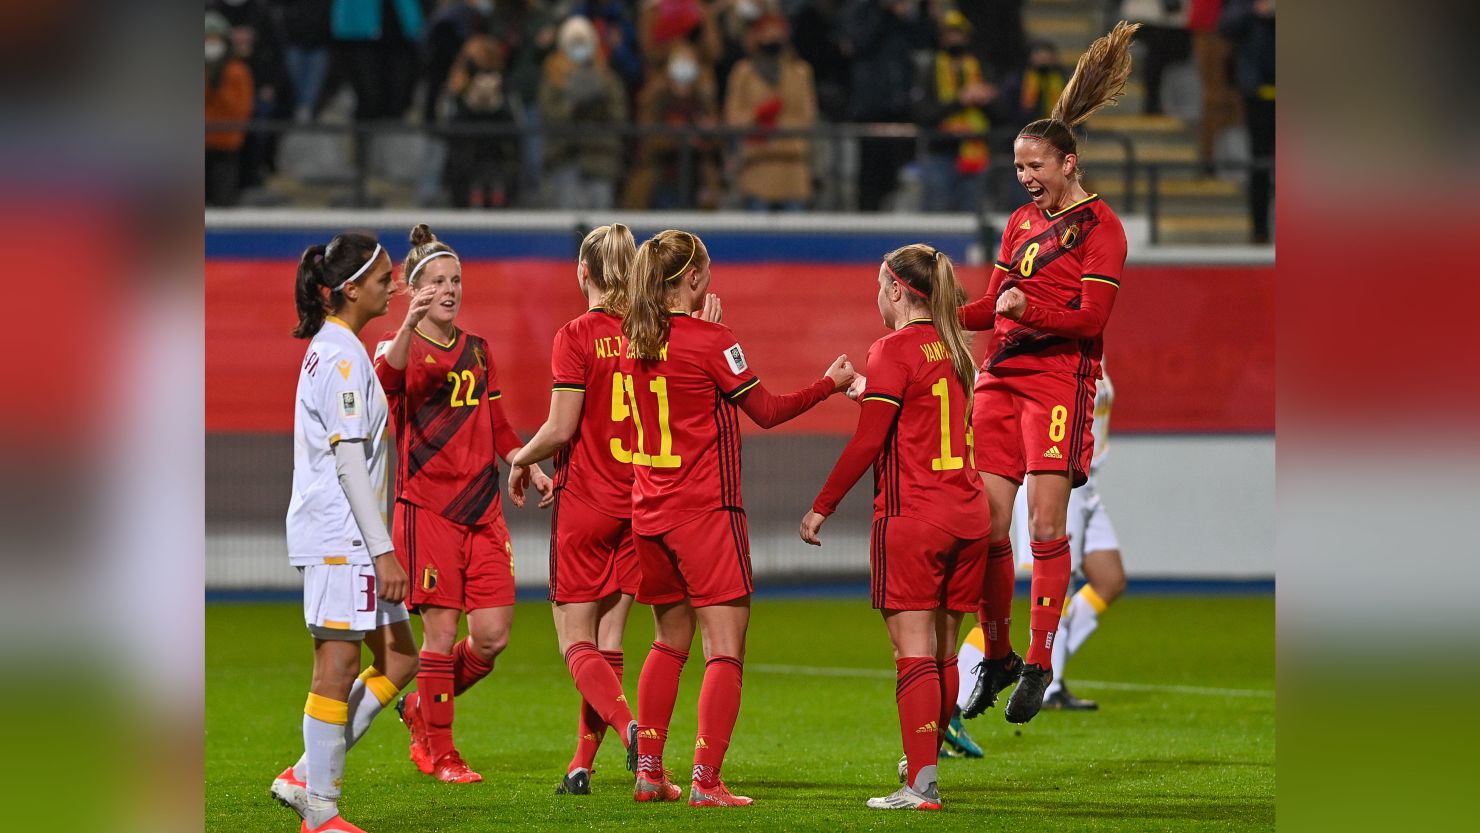 Janice Cayman celebrates with her teammates after scoring during the game against Armenia.